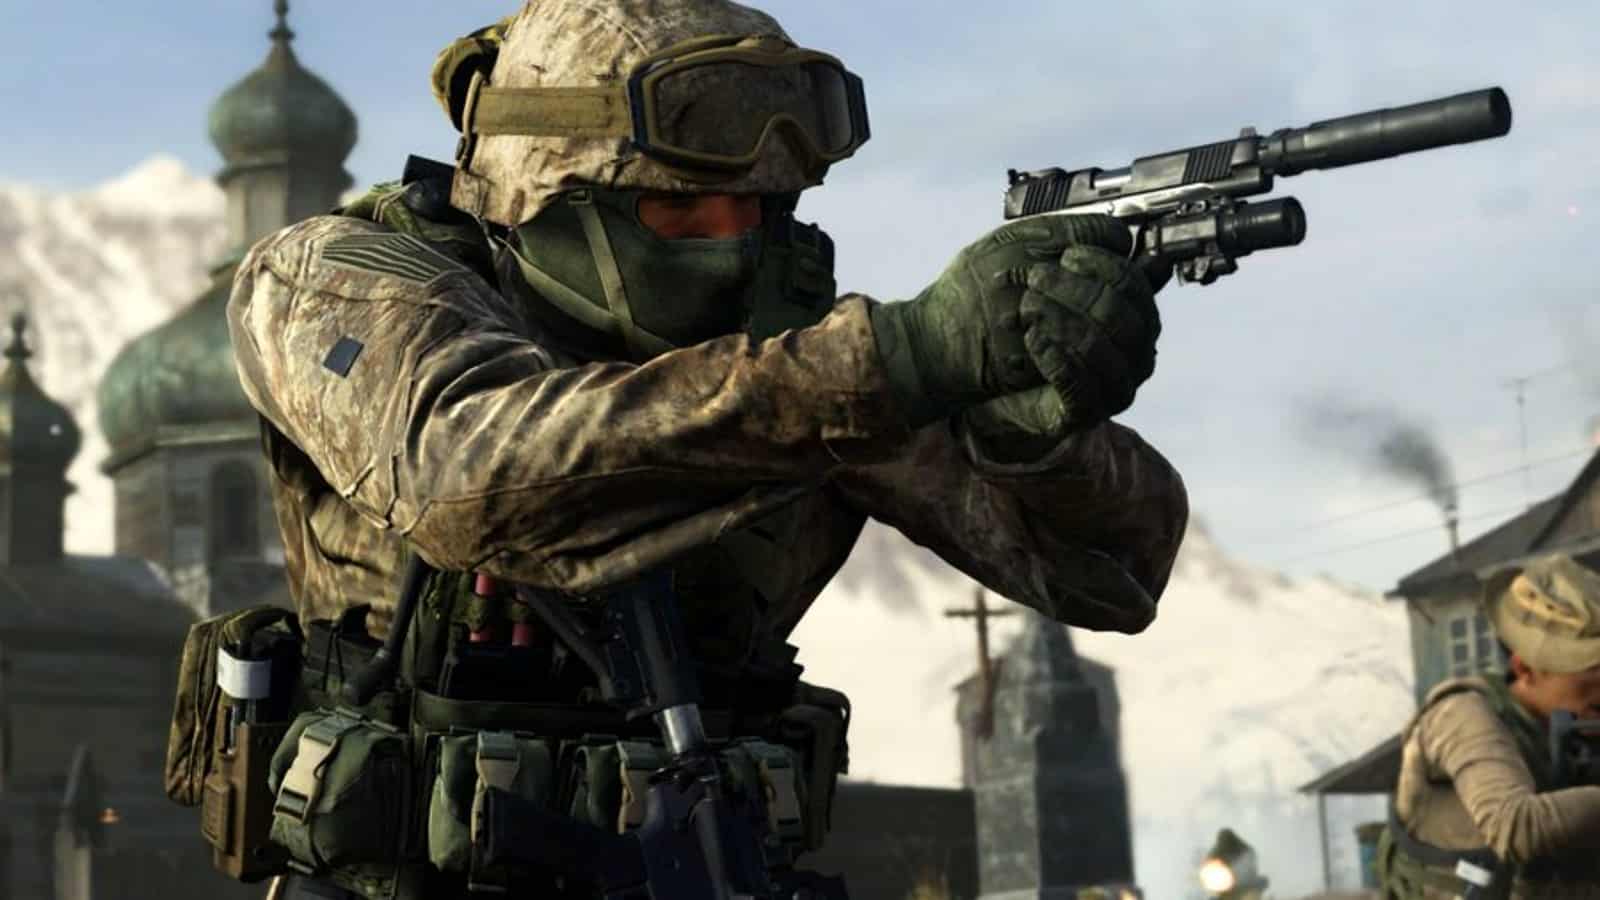 Call of Duty: Modern Warfare 2 beta dates are set for September